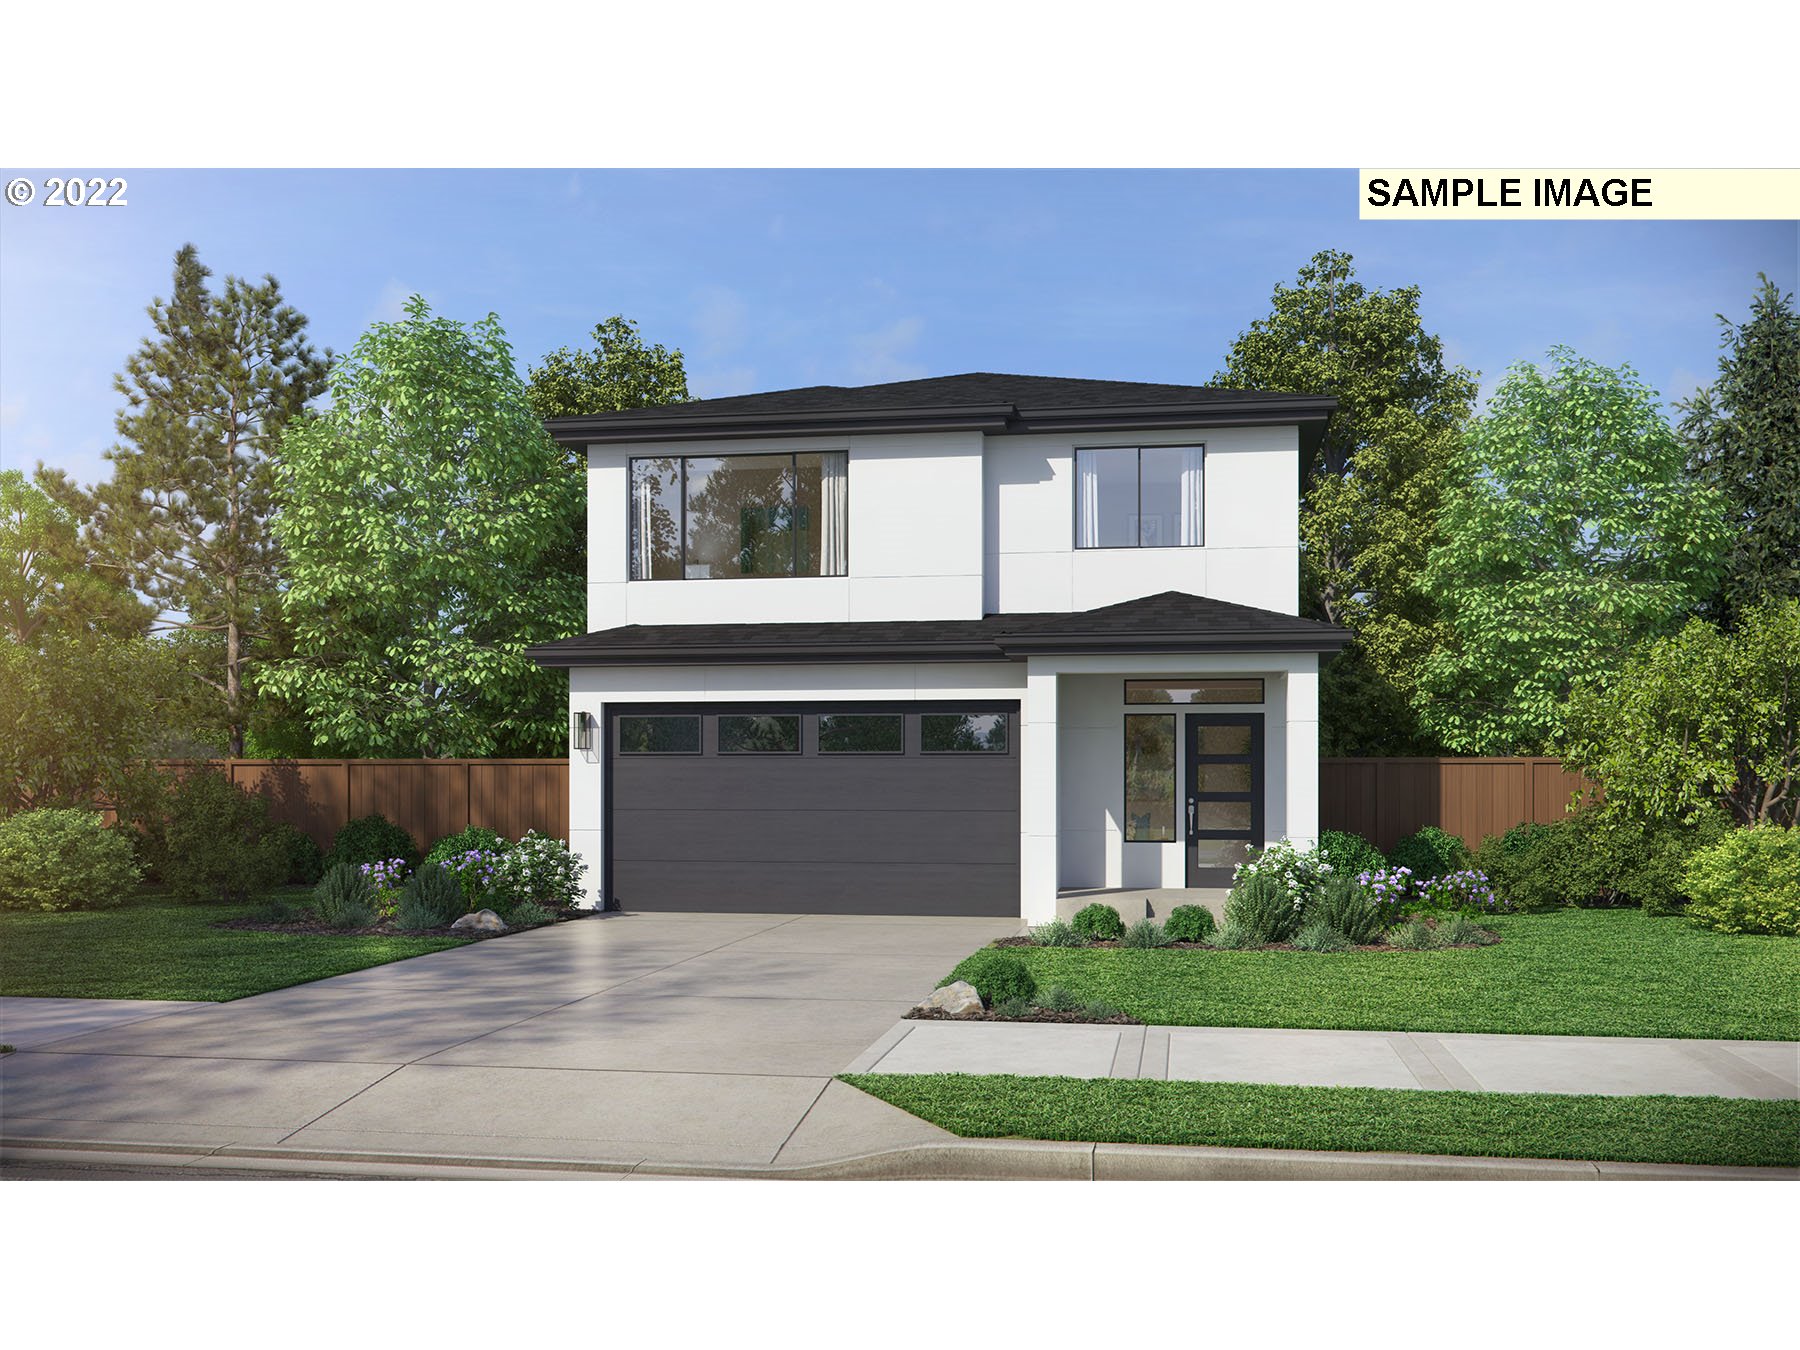 Brand New community- The proposed home will have 4 Bed/2.5 bath/ cover back patio. Large loft area great for media or 2nd living space. Home includes slab quartz in the kitchen, SS appliances, Fireplace,Smart Home Technology and much more. Buyer can select layout and all options in our 5000 SF Design Studio. Reputable builder with excellent Warranty program. Top Rate school district, close to shopping, entertainment and recreational trails and parks.